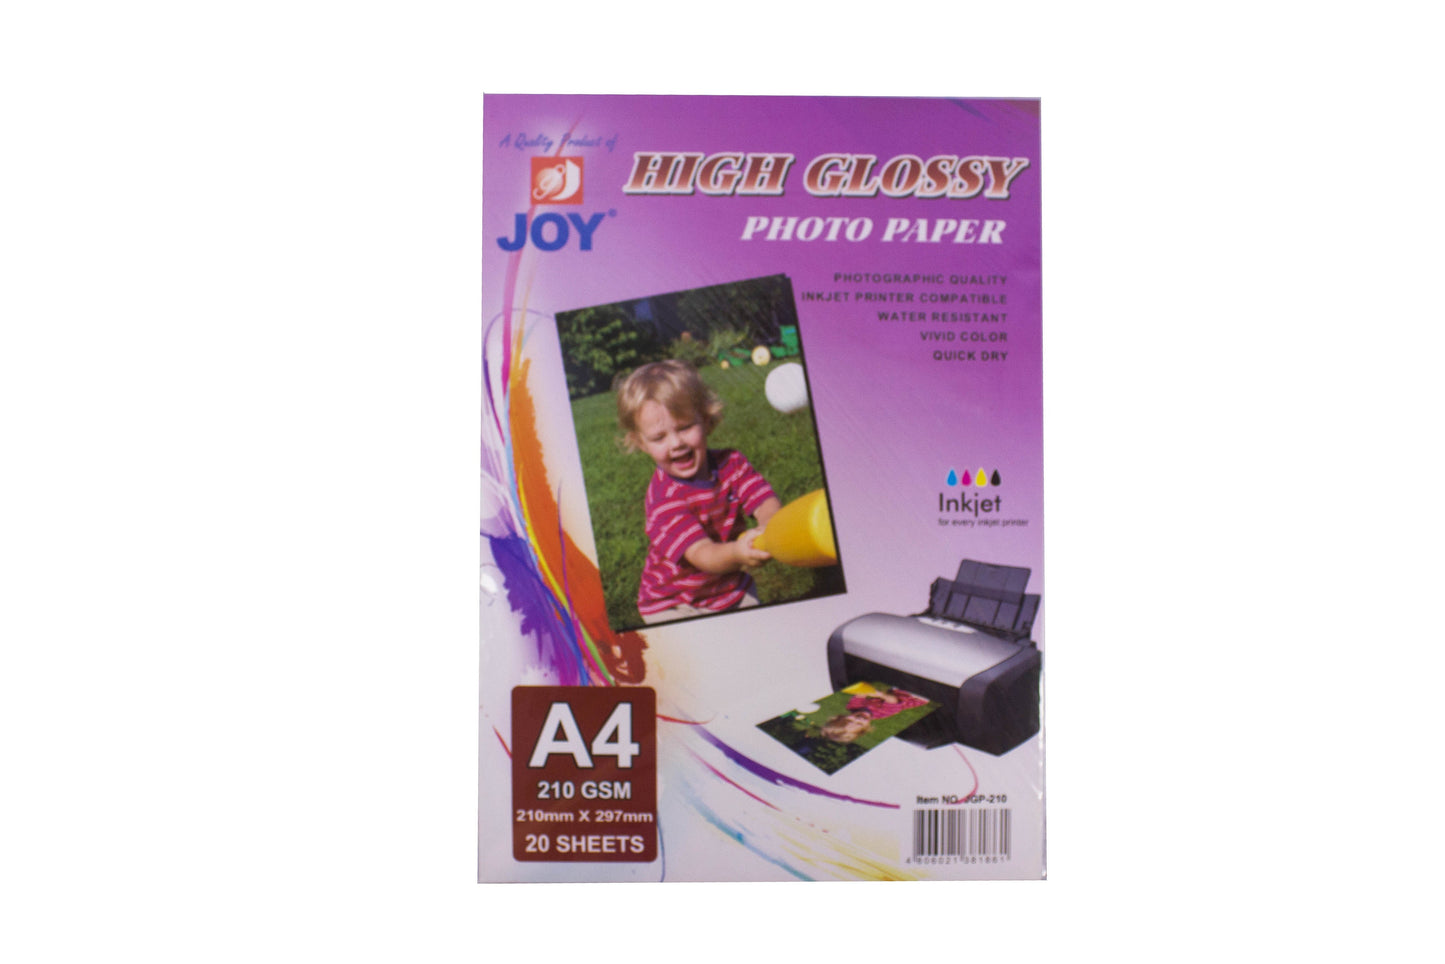 Joy Photo Paper A4 Glossy 210gsm (10Pack)